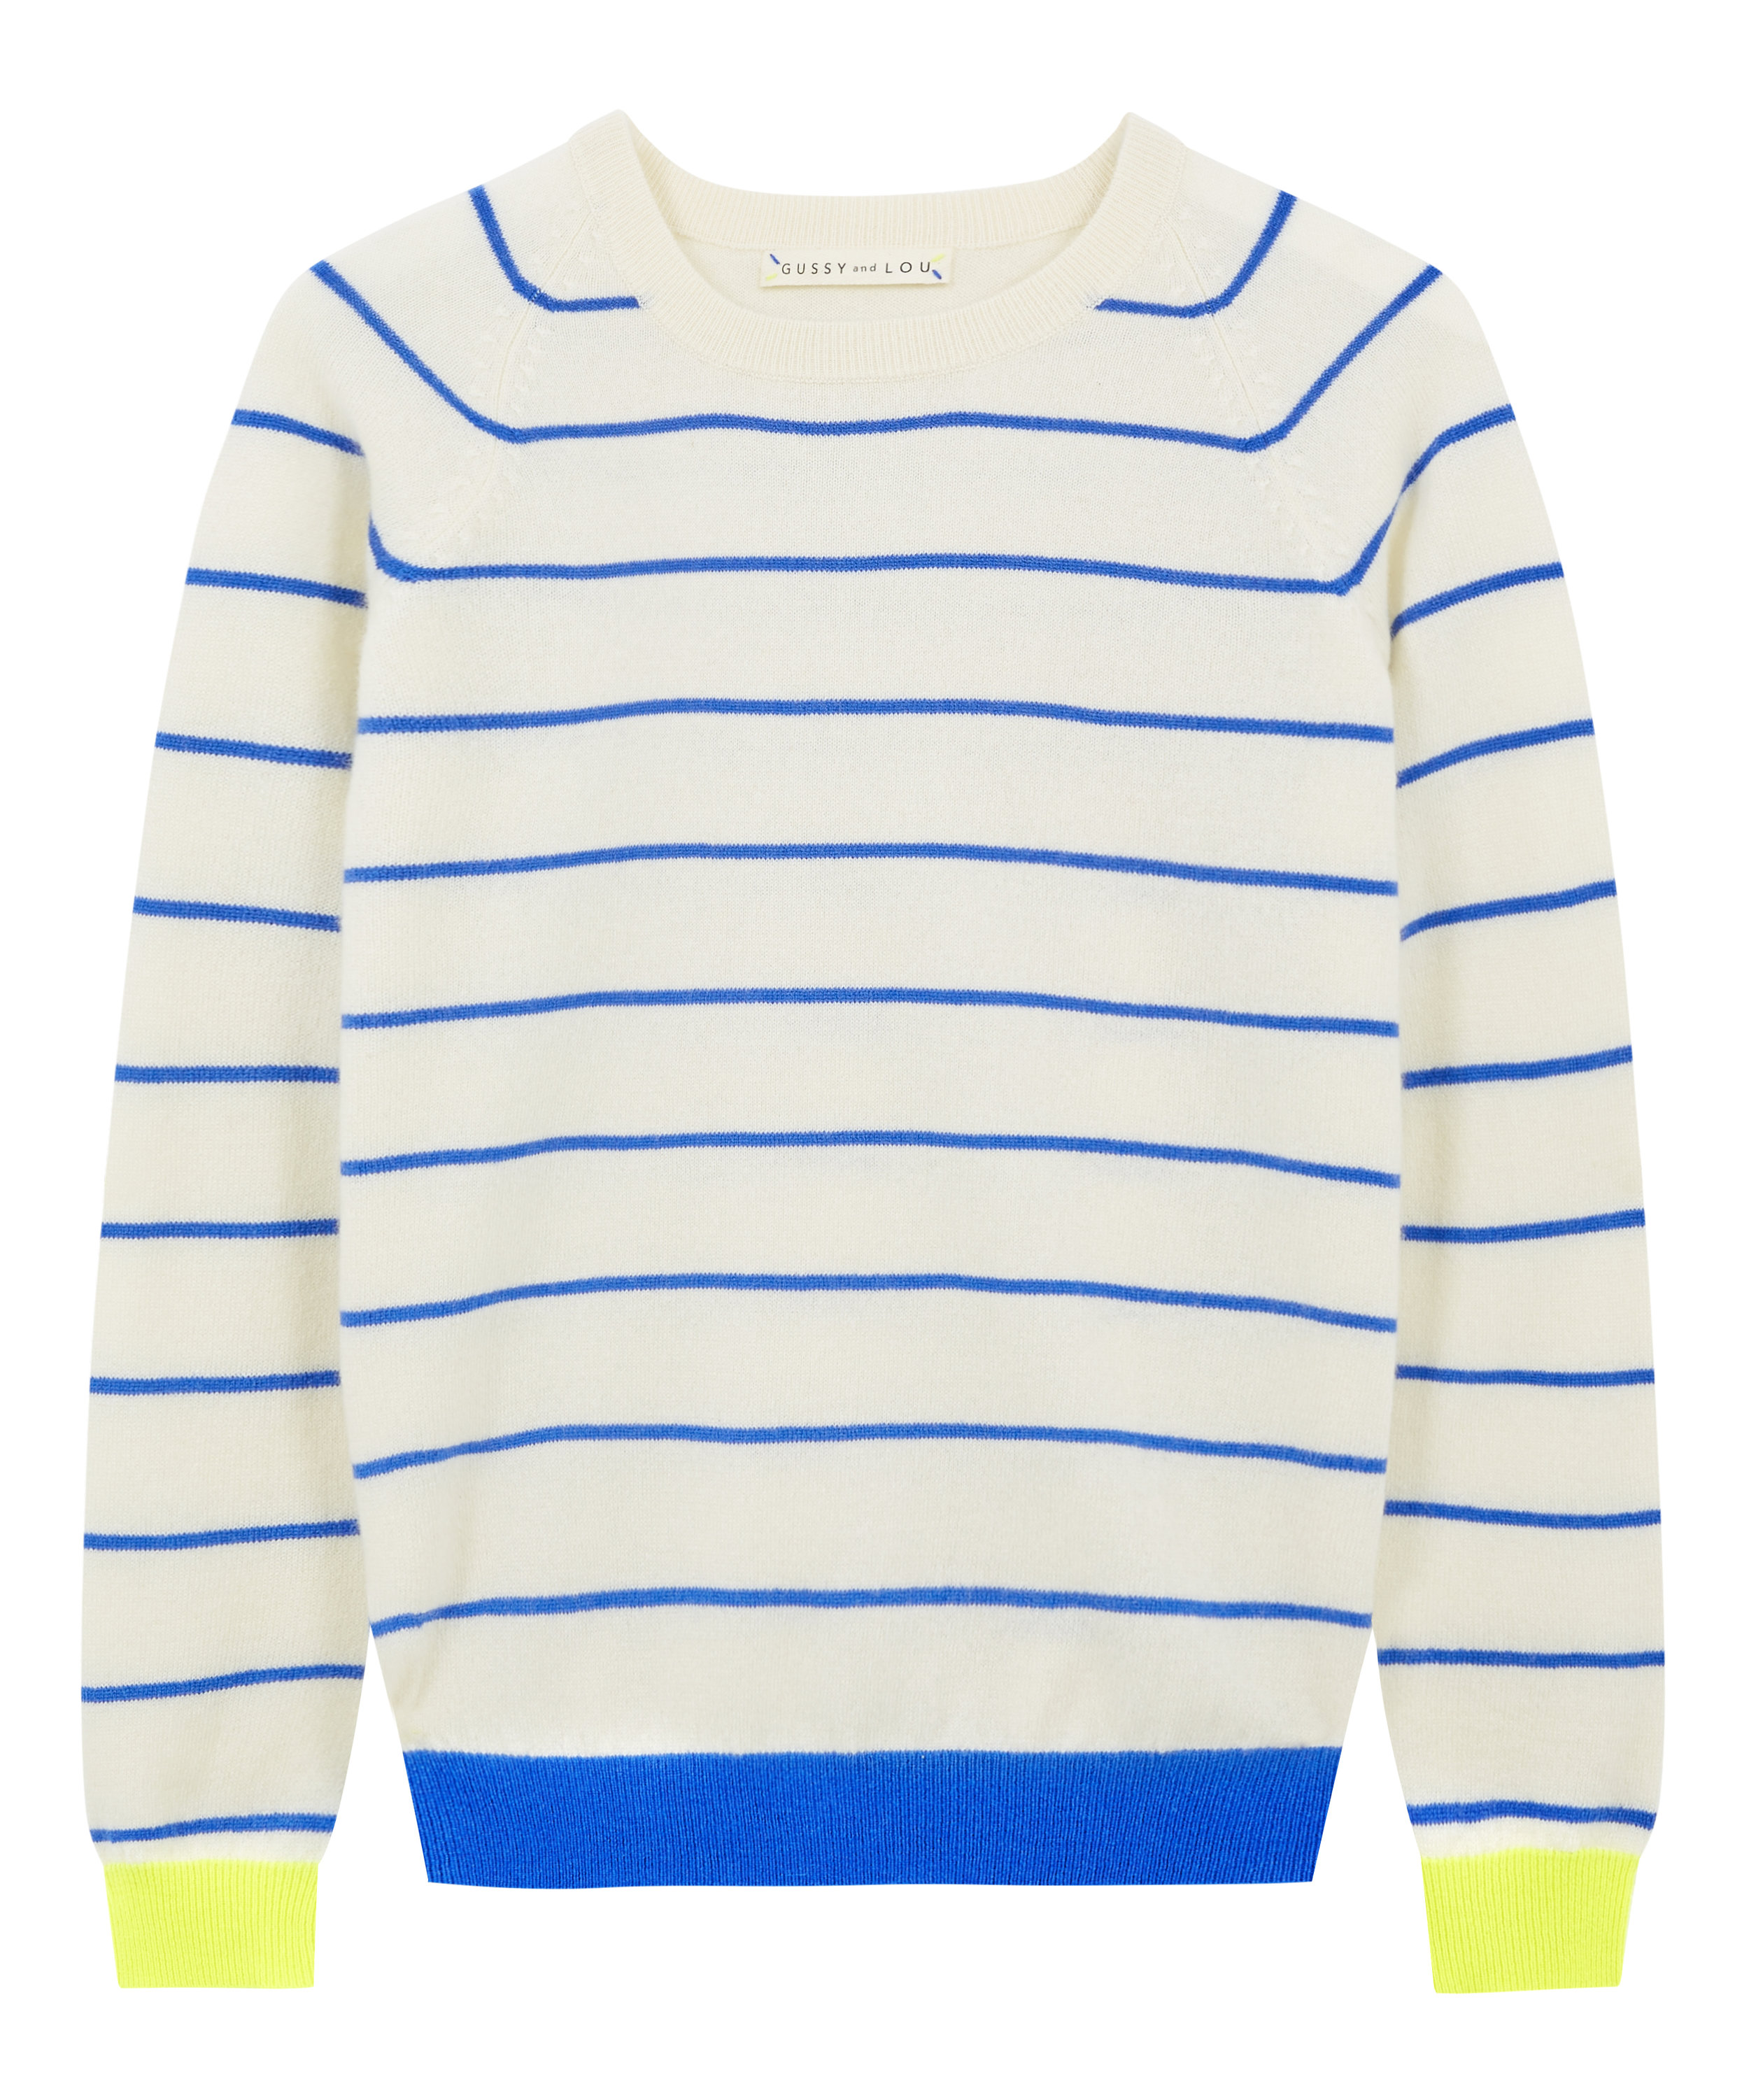 Ladies Cashmere Neon Stripe Jumper — Gussy and Lou